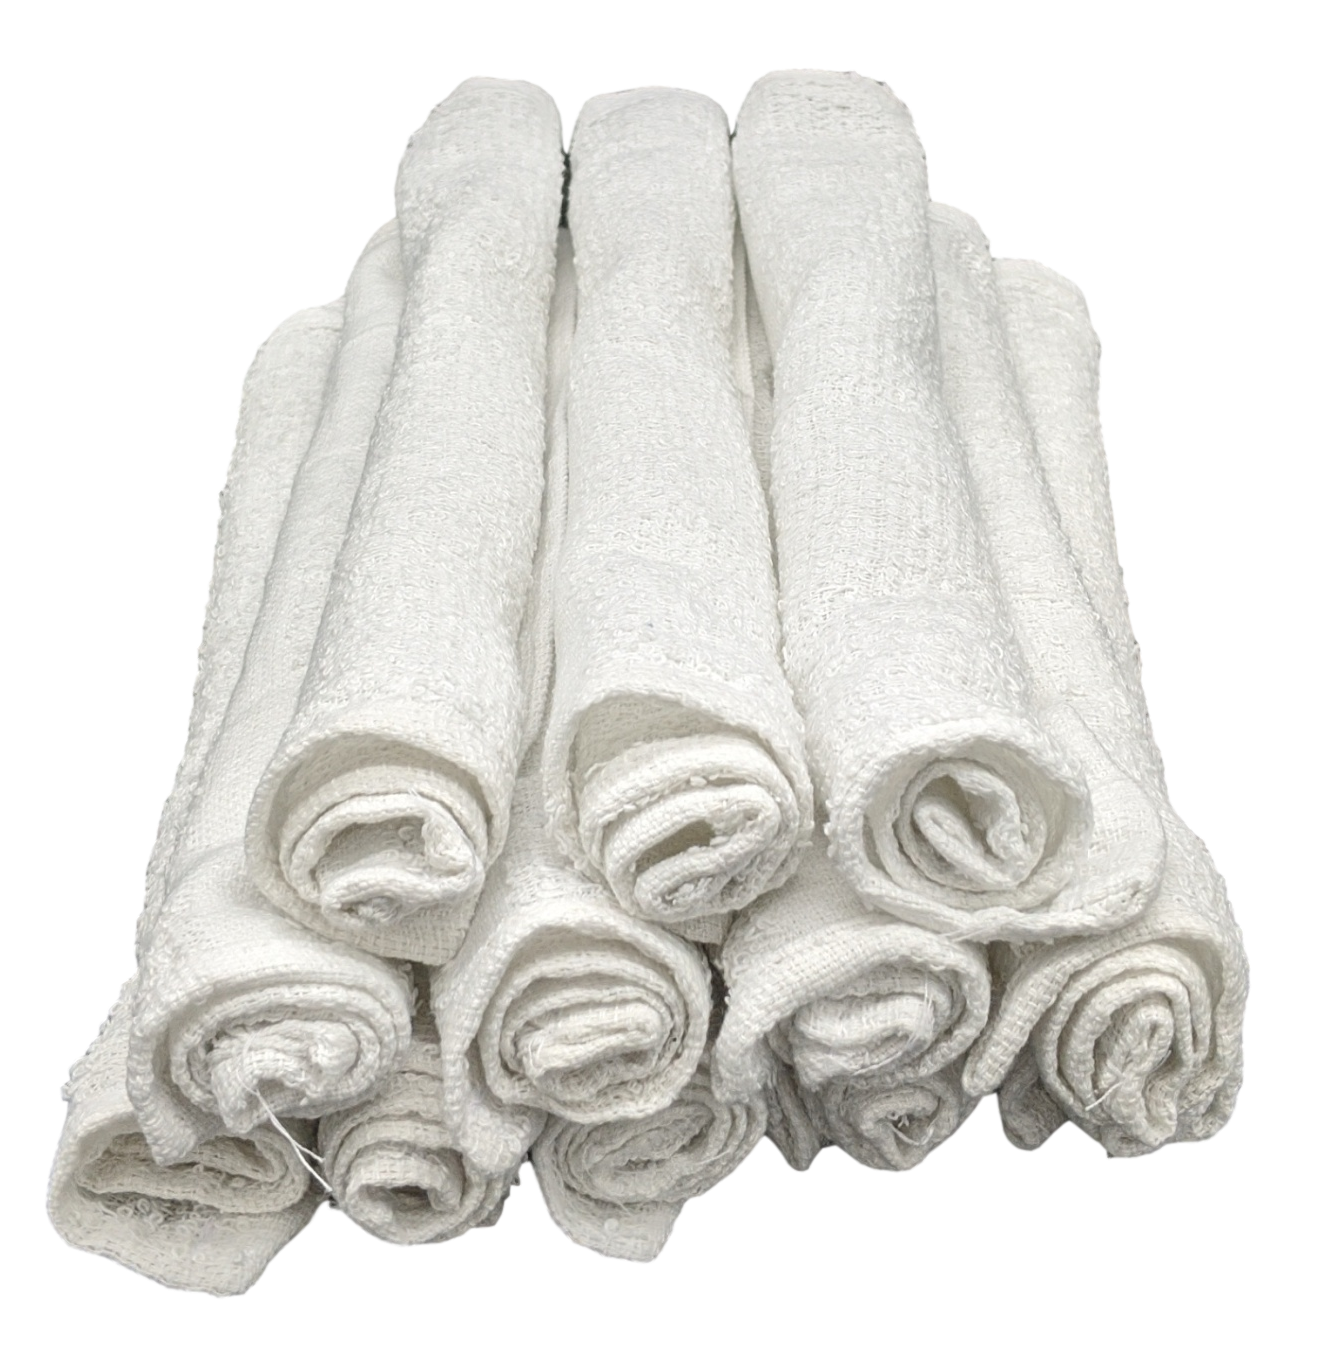 720 Pack - 12 Inch x 12 Inch White Cotton Value Rags - Reusable Lt Weight Thin Cloth Rags - Wood Stain/Painting/Crafts/Garage - 3/4 Lb per Dozen - image 4 of 9